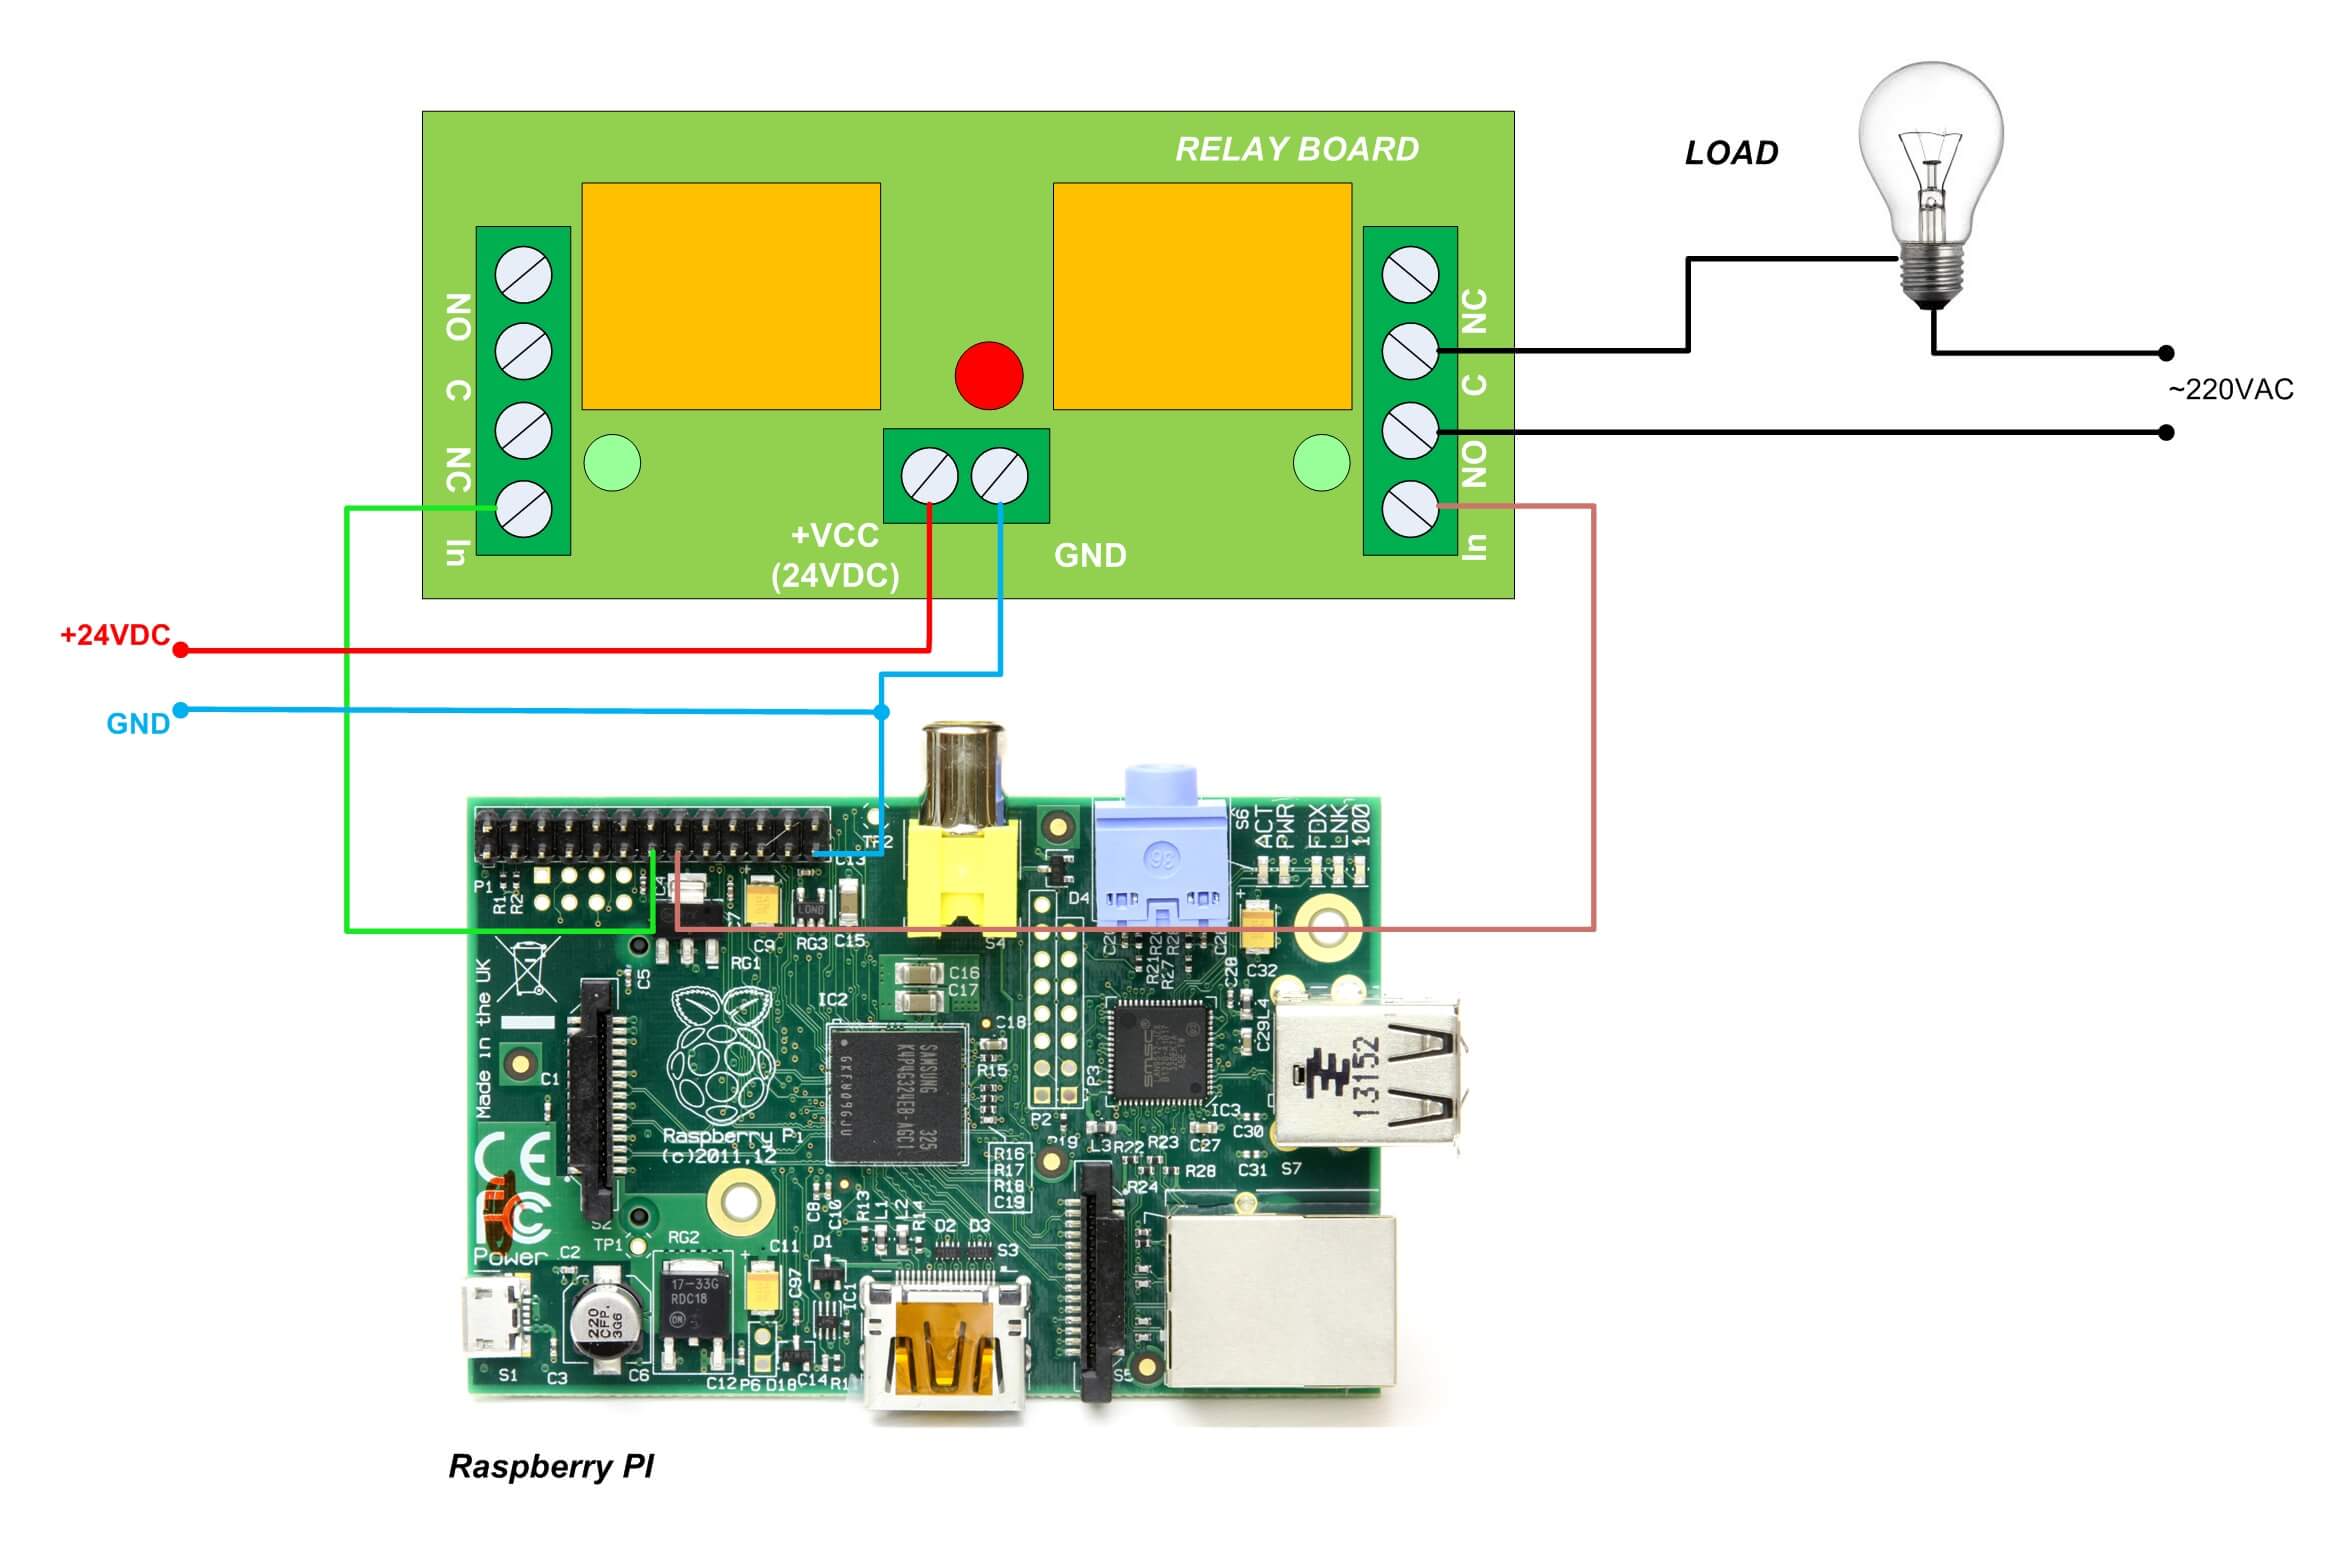 relay board connected to Raspberry PI